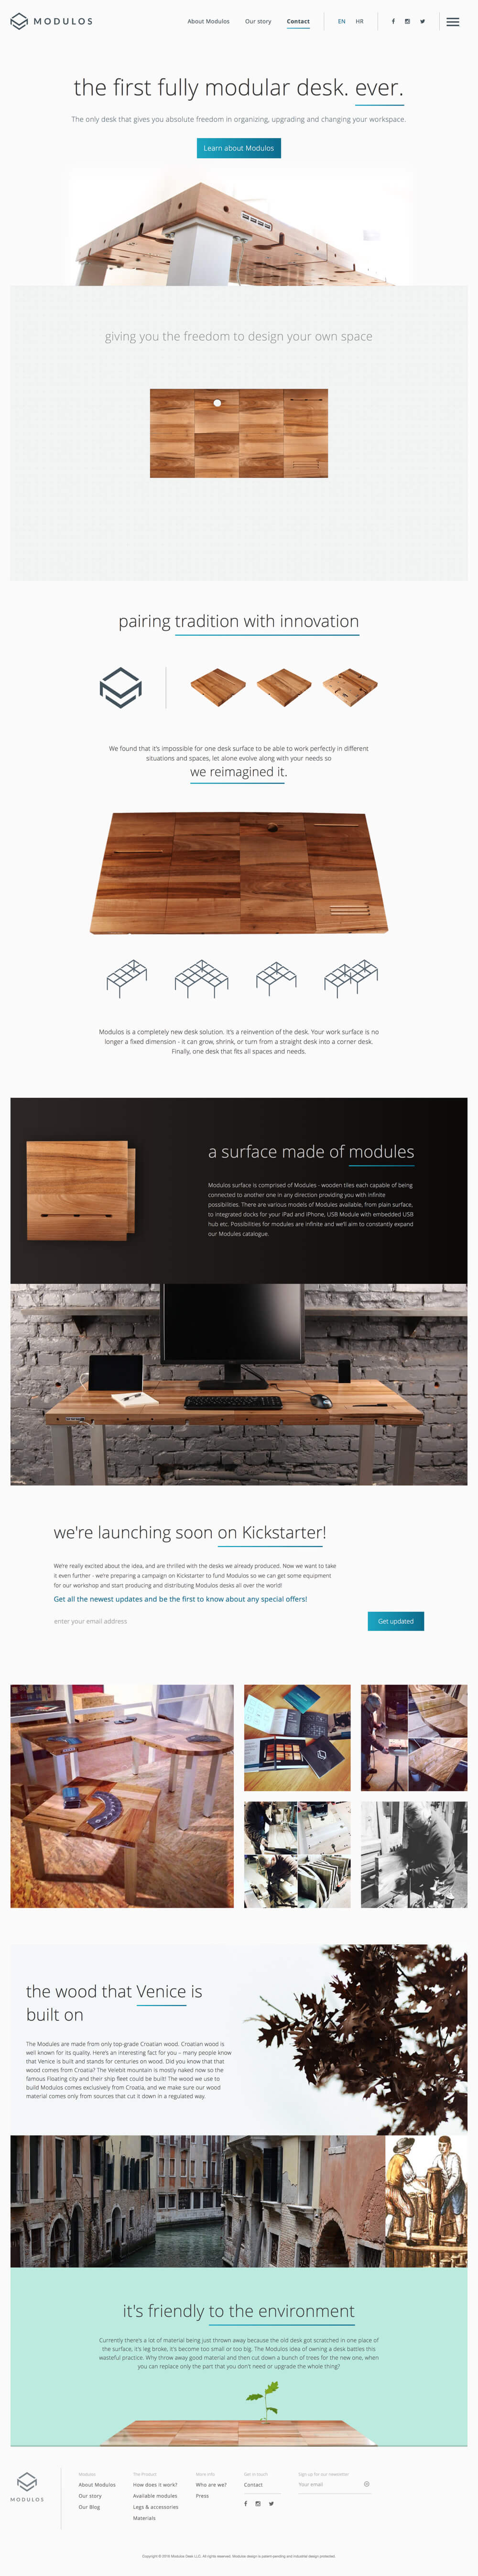 Modulos - A revolutionary desk system made for the new age